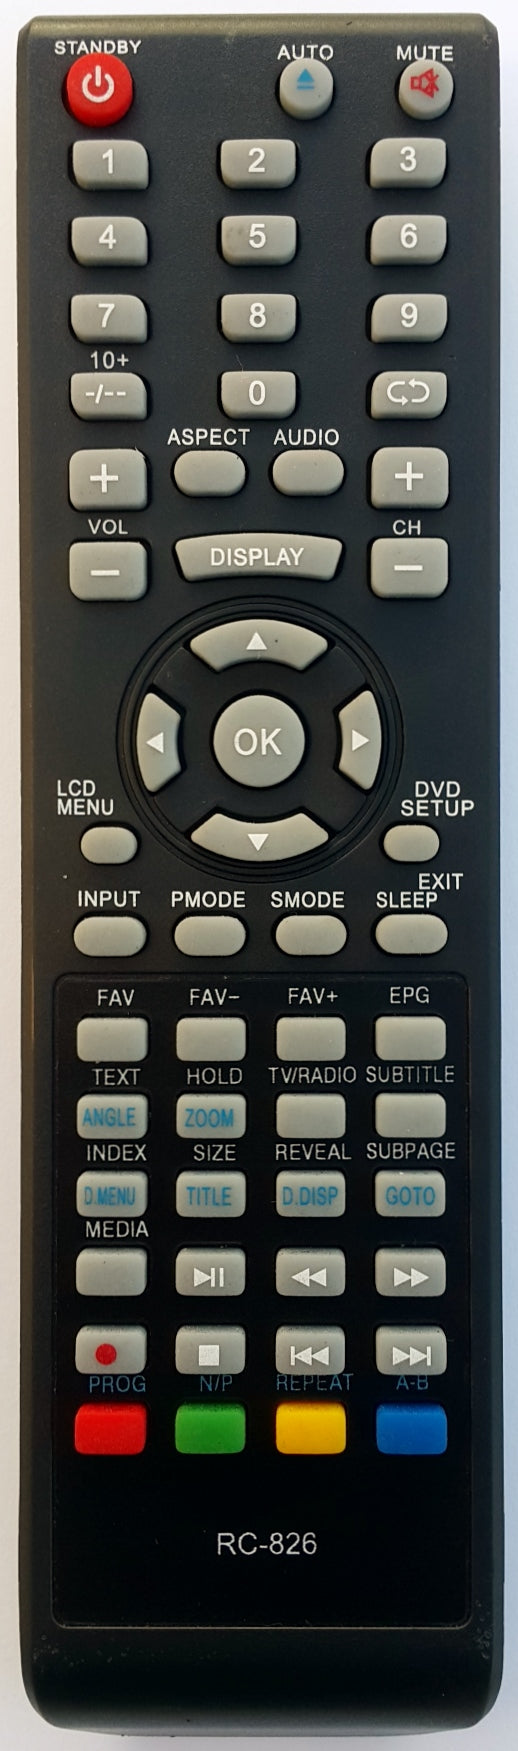 REPLACEMENT BAUHN REMOTE CONTROL -  ATV19HED2 ATV-19HED2  LCD TV - Remote Control Warehouse